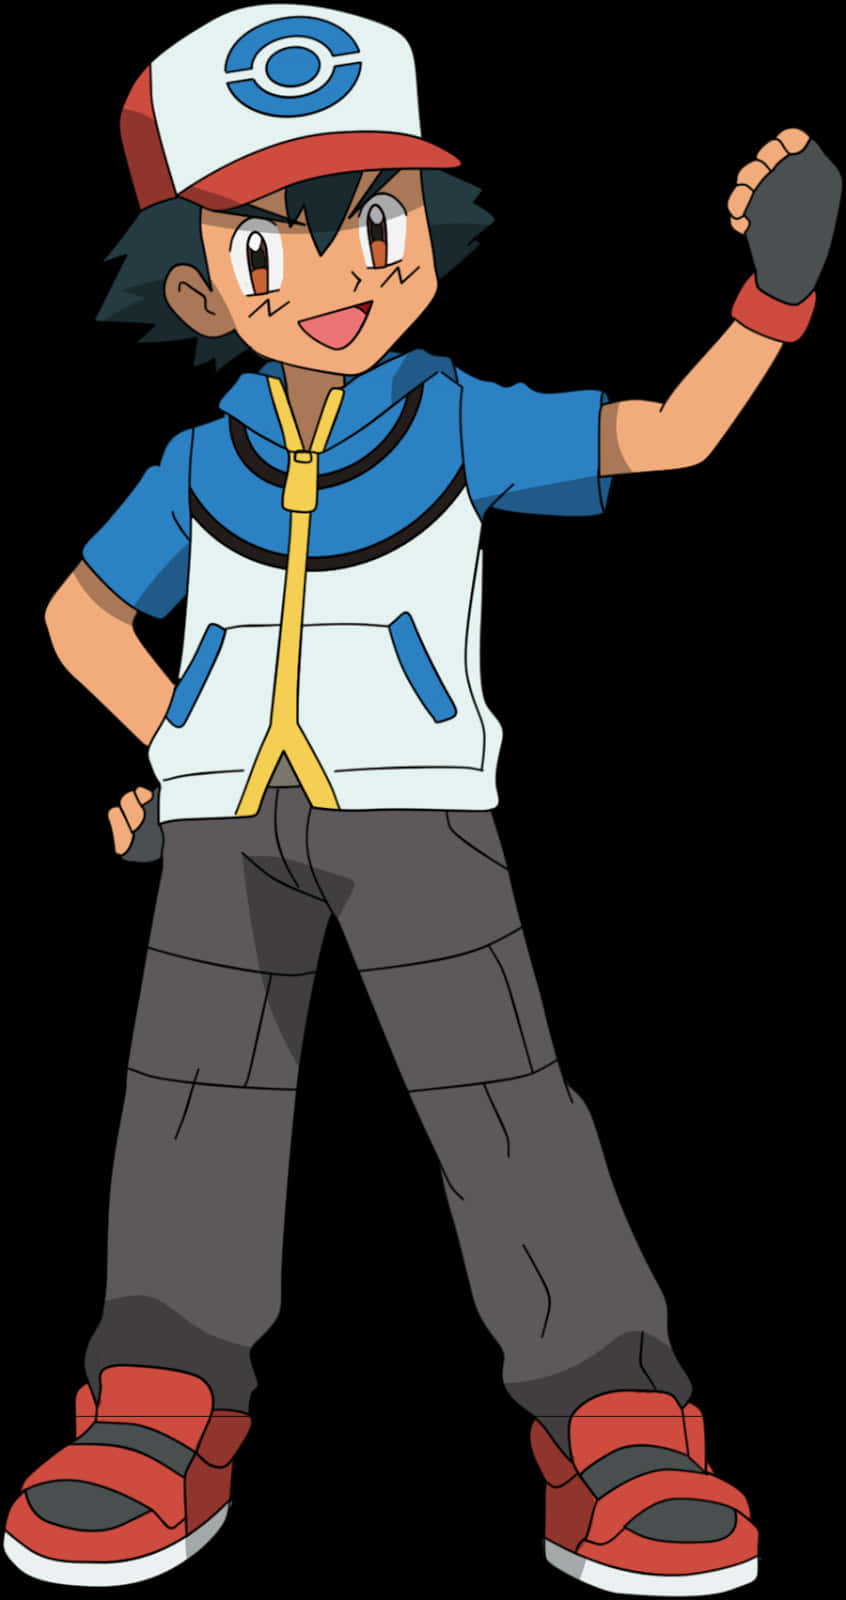 Ash Ketchum Pokemon Trainer Ready For Battle PNG